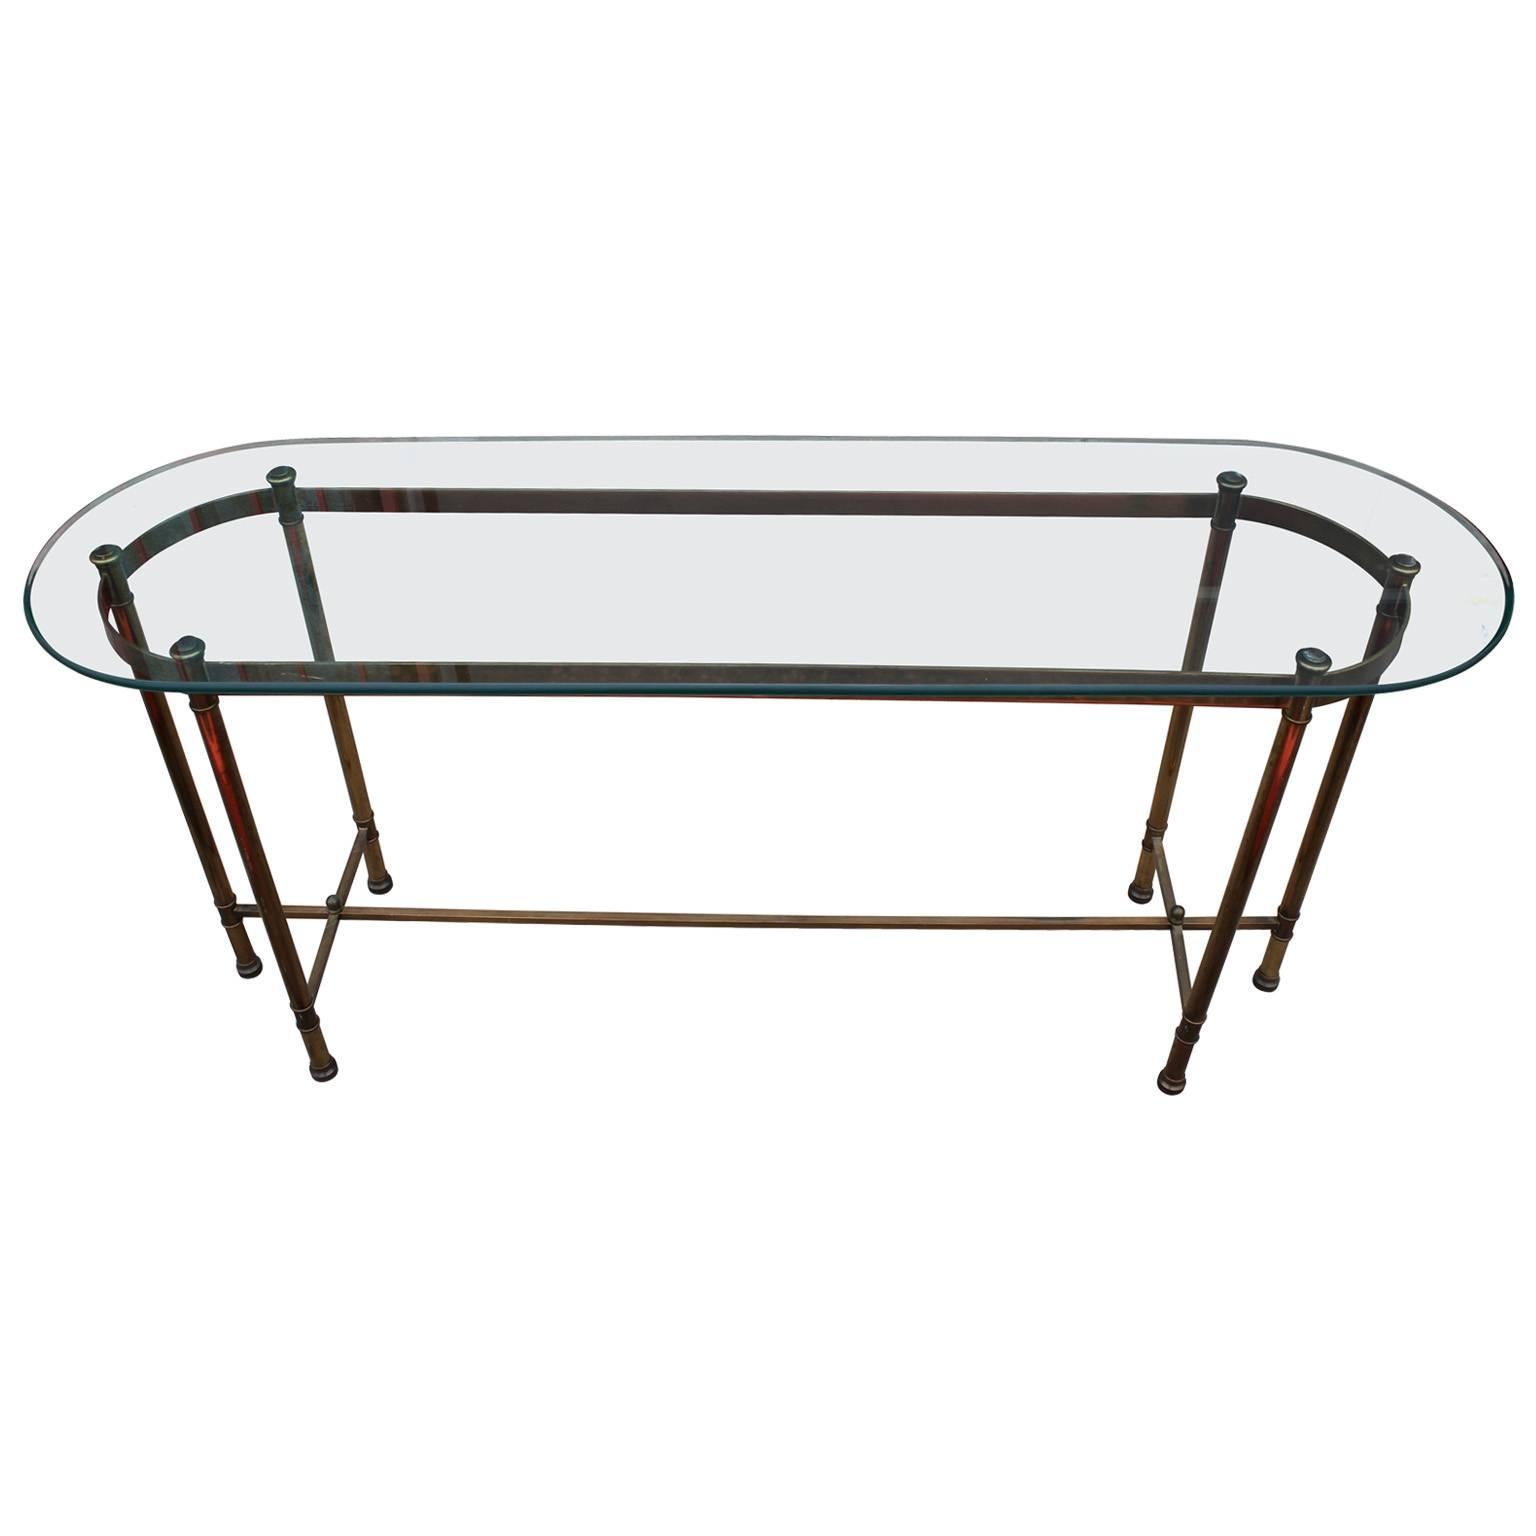 Wonderful brass and glass console by Labarge. Table base has simple, clean lines with the perfect amount of detailing. It has a thick glass top with a bevel.